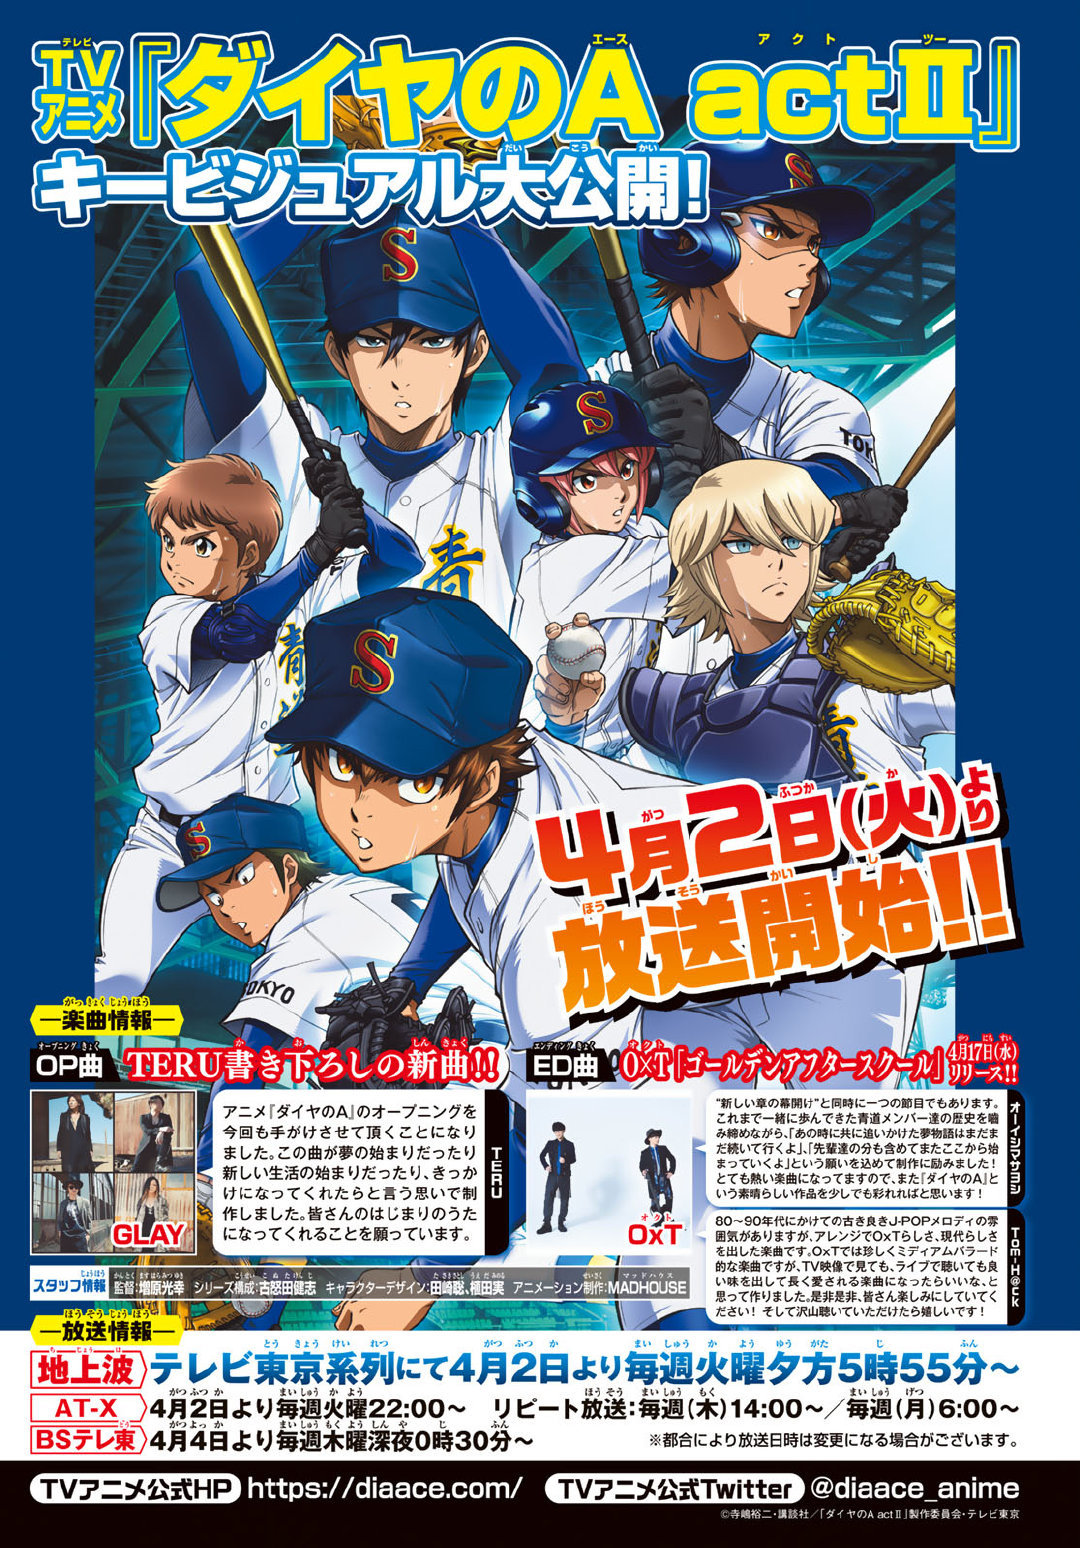 A new key visual preview for the â��Diamond no Ace: Act IIâ�� TV anime has been revealed. The opening and ending theme music artists have also been announced. Broadcast begins April 2nd.
-Music-â�¢ OP: GLAY
â�¢ ED: OxT
-New Cast-â�¢ Kaoru Yui (CV: Ayumu...